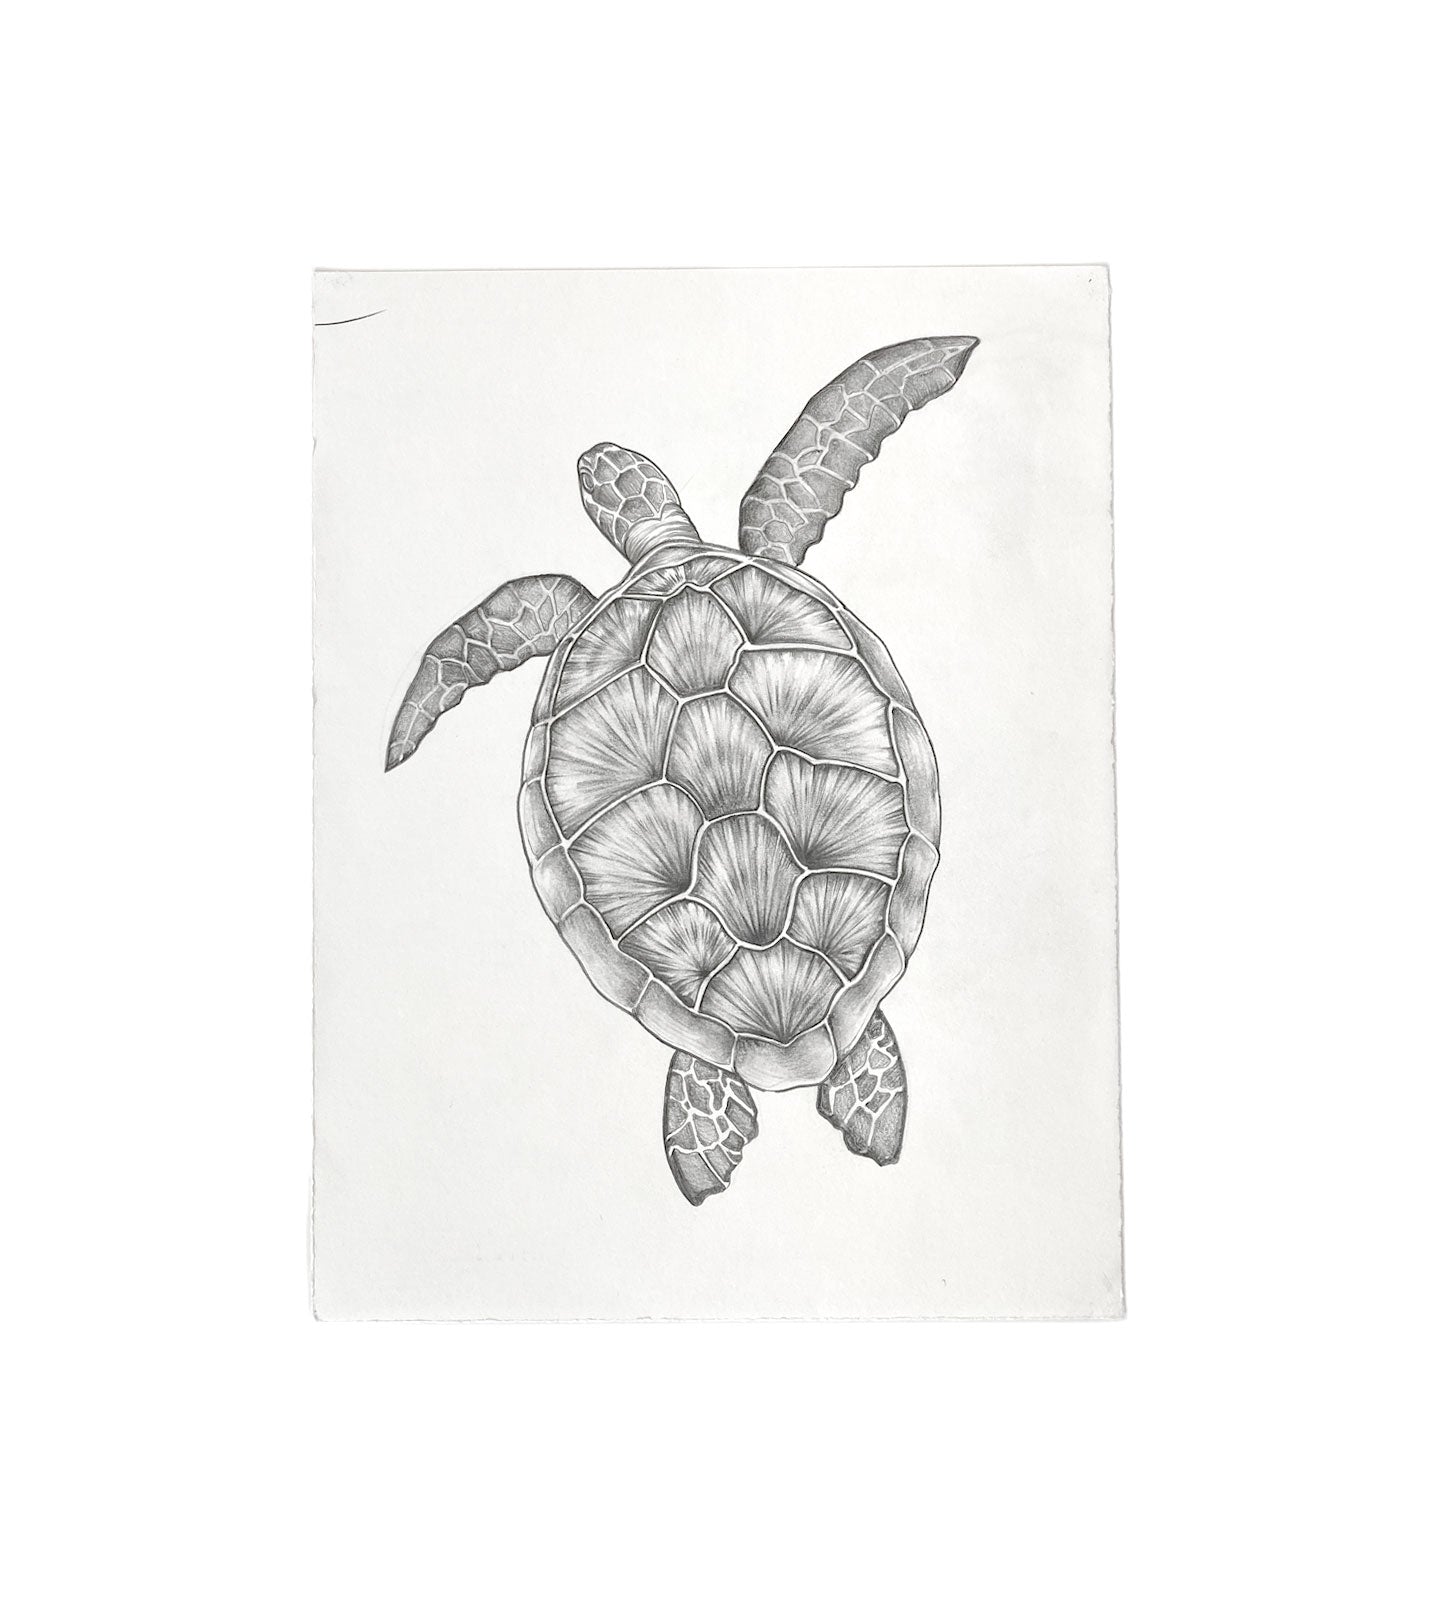 sea turtle drawing top view